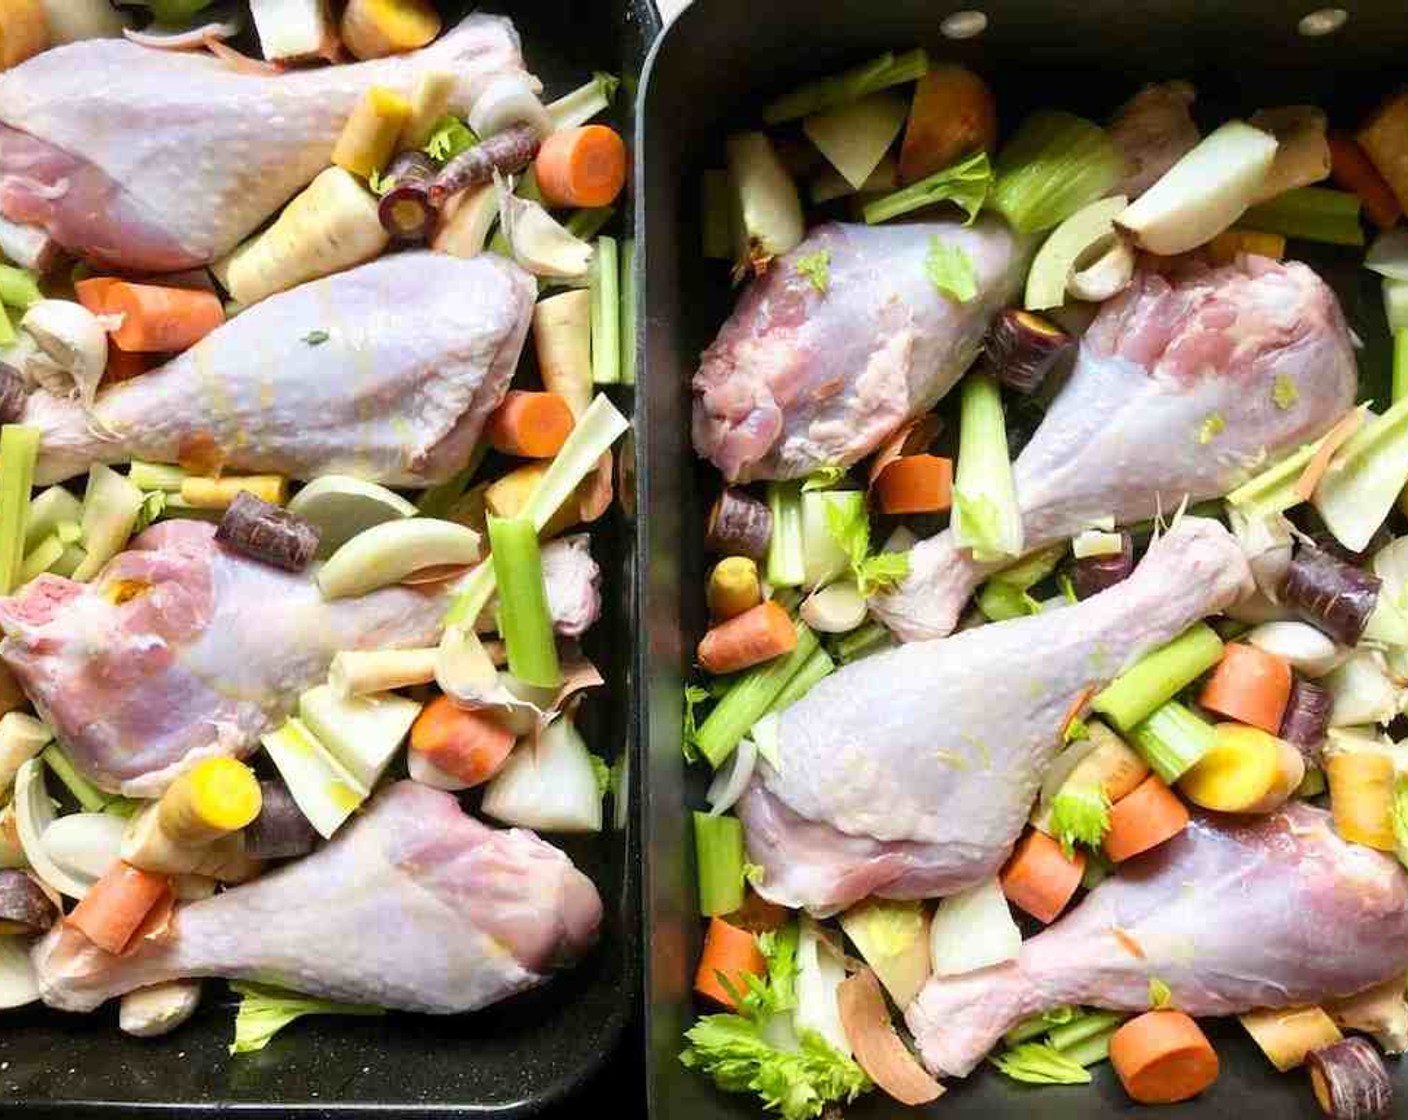 step 2 Using two large roasting pans, spread out 4 of the Turkey Legs (8) in each pan then fill in the gaps with the Yellow Onions (3), Carrots (6), Celery Leaves (4 stalks), Parsnips (4), and Garlic (1 head).